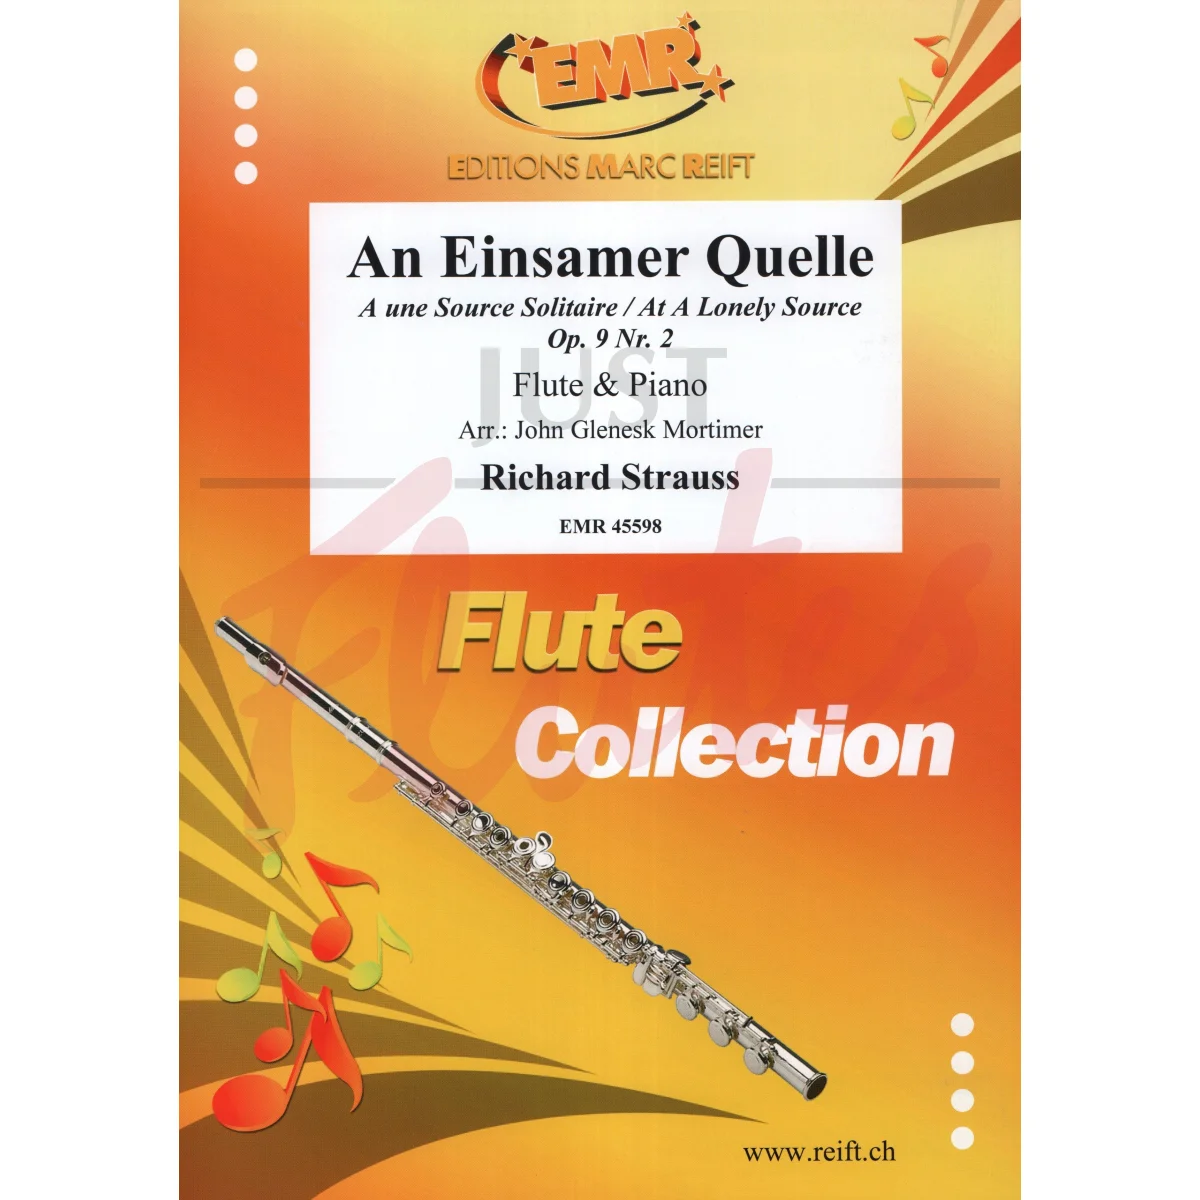 An Einsamer Quelle (At a Lonely Source) for Flute and Piano